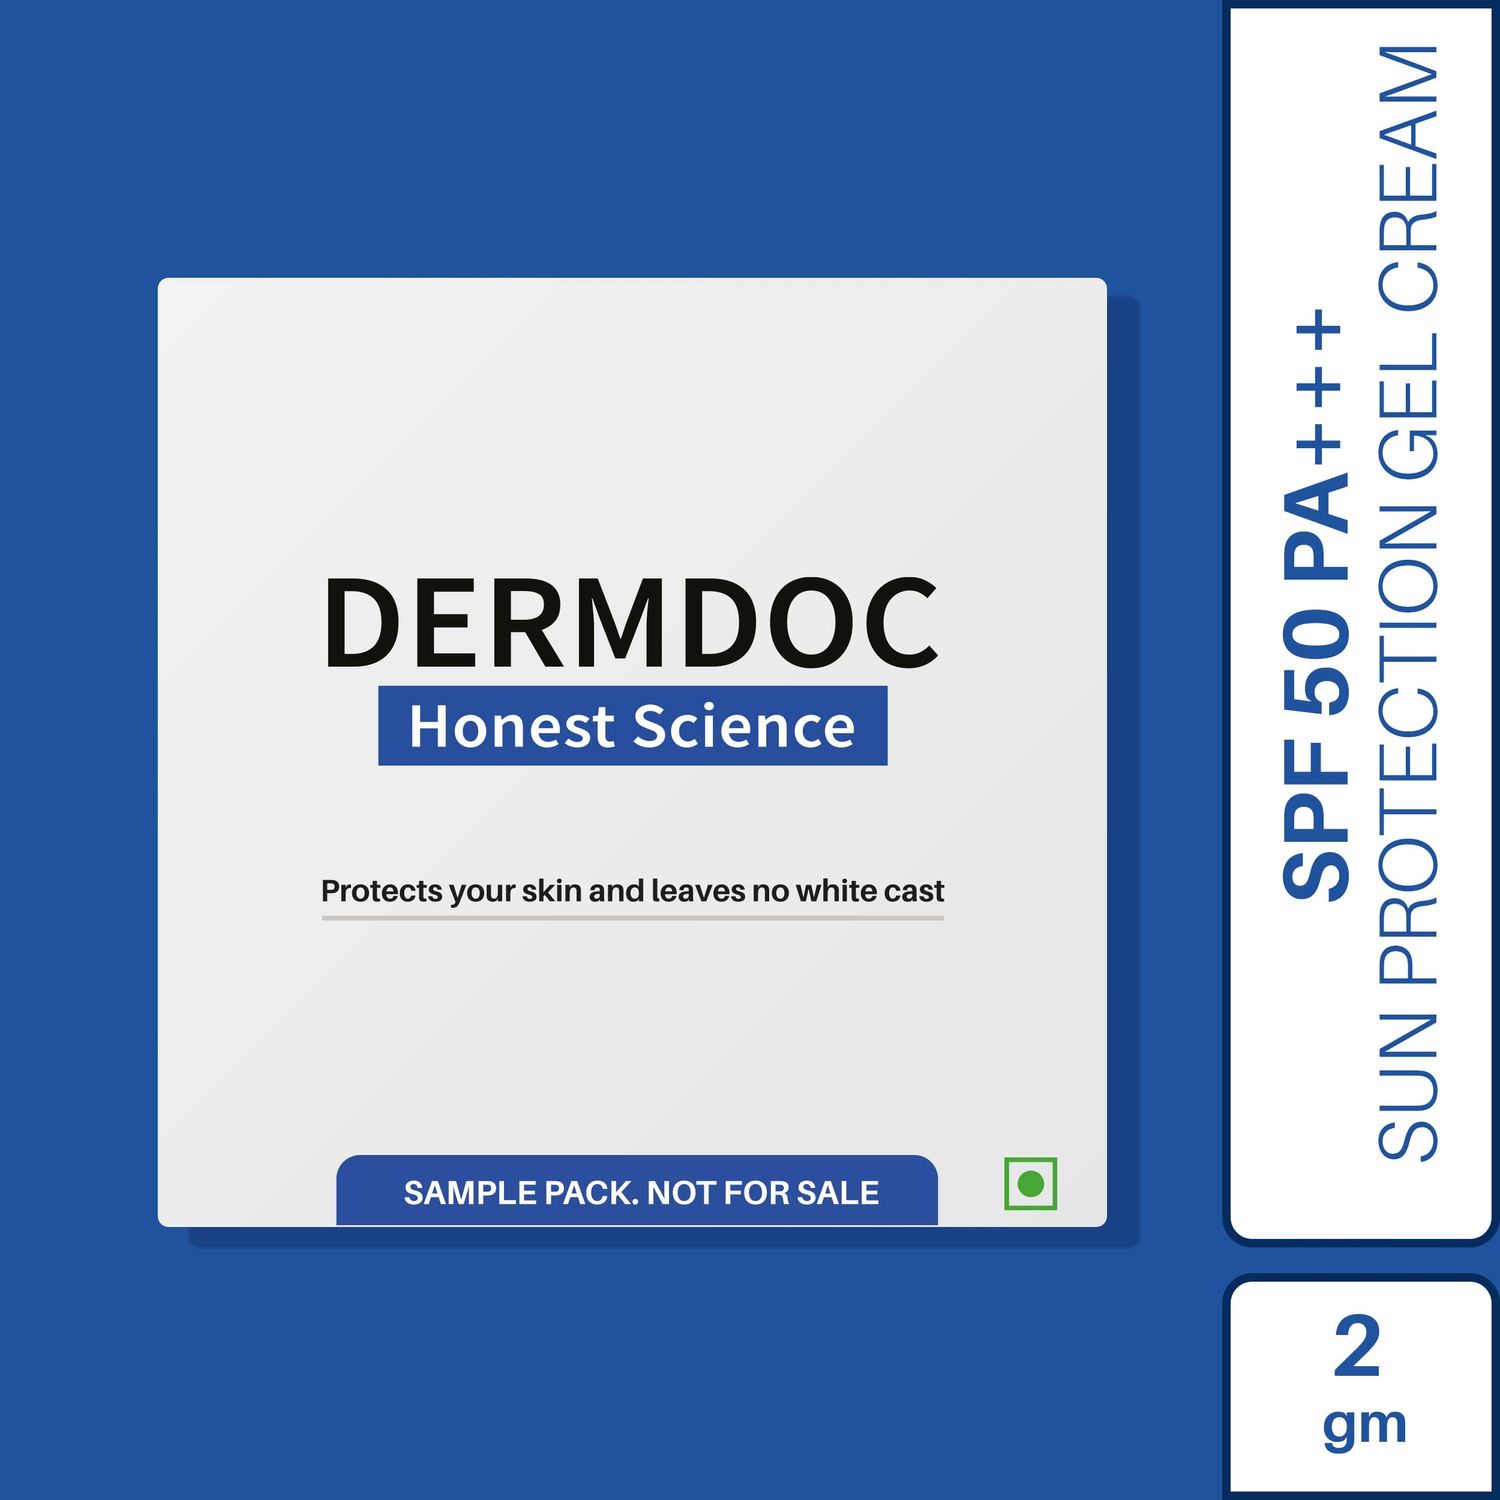 Buy DermDoc Sun Protection Gel Cream with SPF 50 PA+++ (2 gm) - Purplle